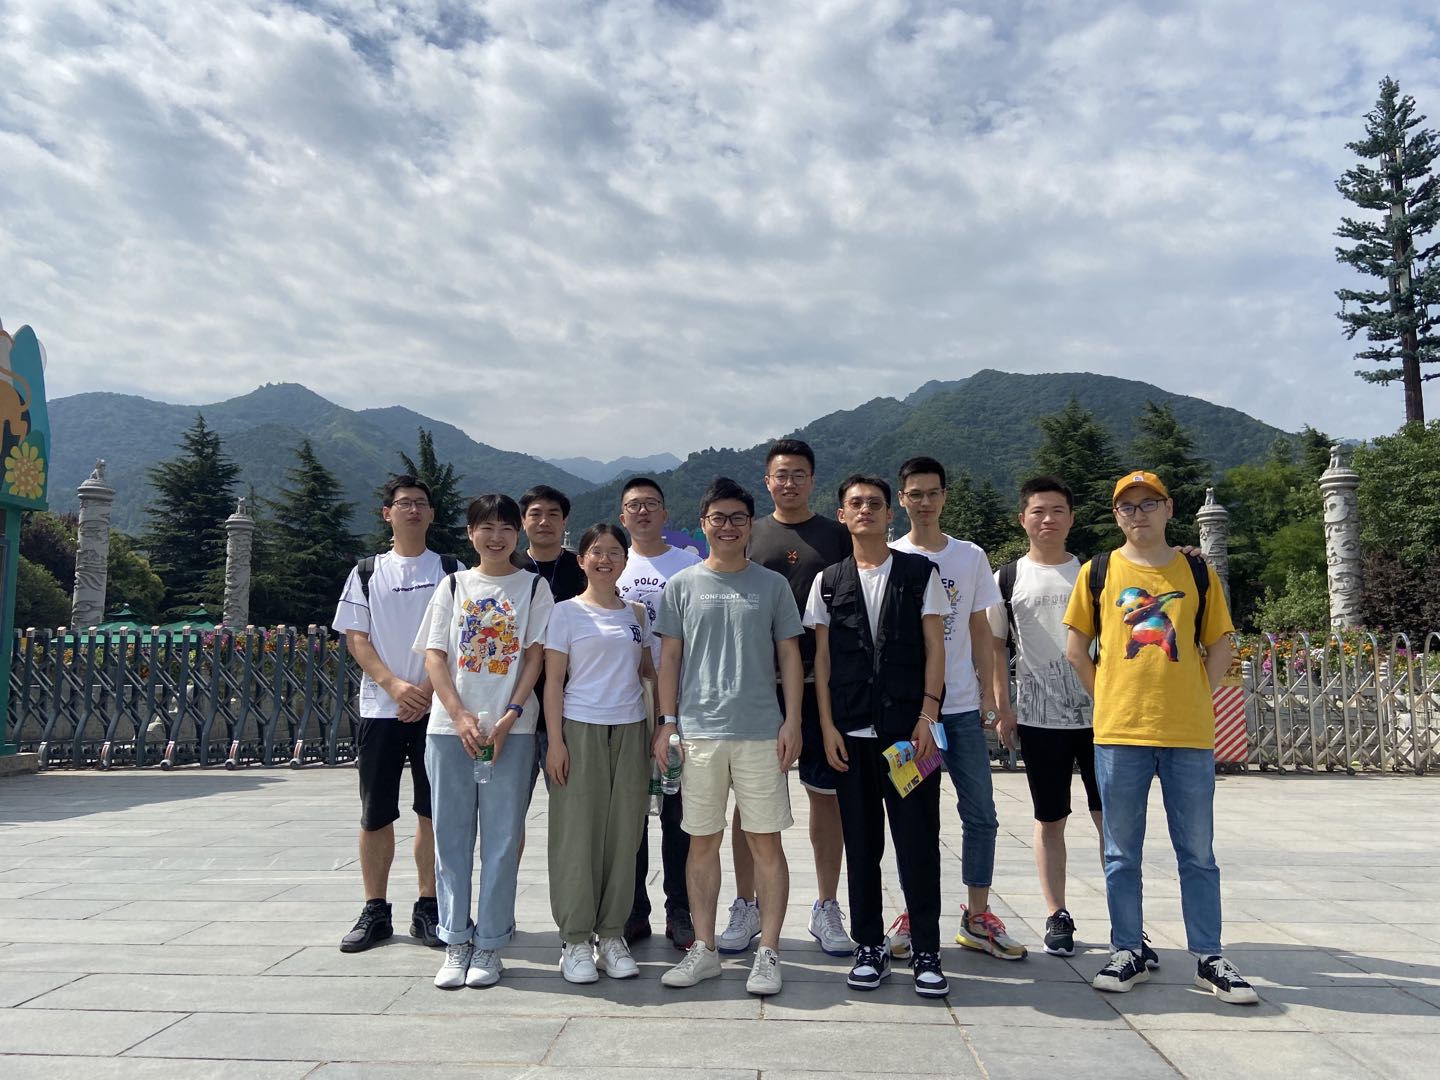 Our Group Out to Qinling Wildlife Park